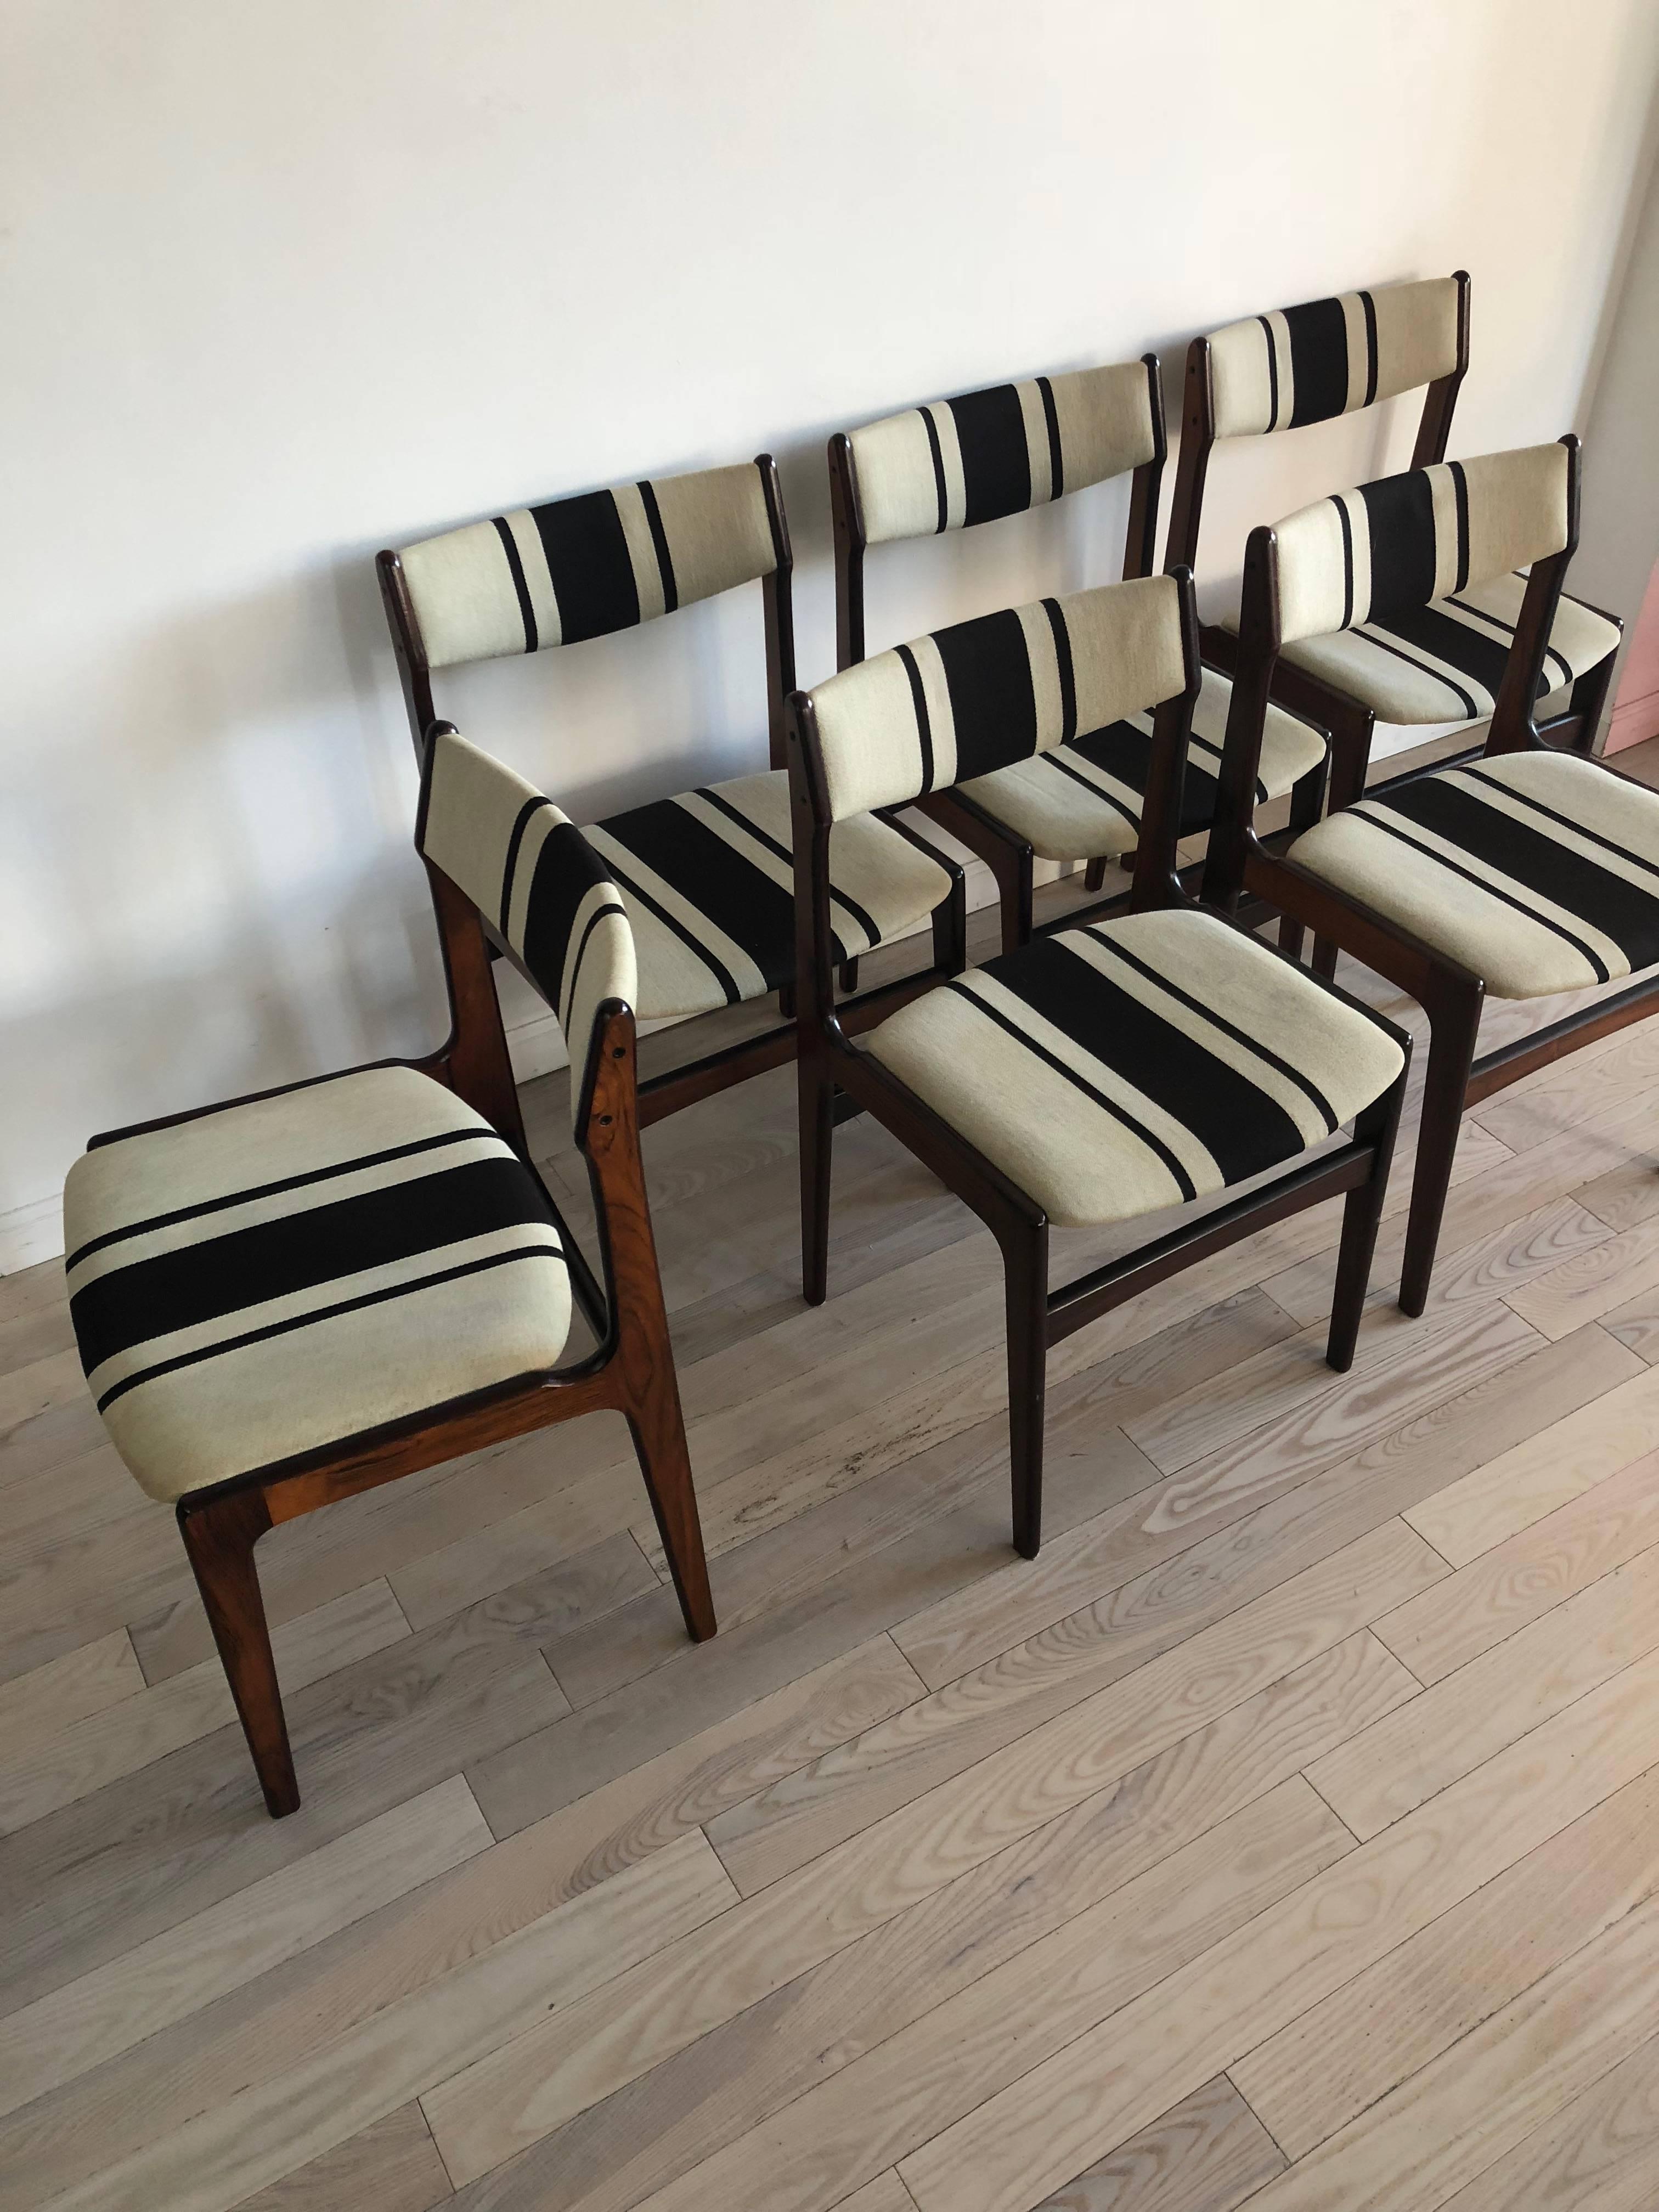 Beautiful rosewood frame with striped upholstery. Sold as a set of six dining chairs. Excellent condition with mild staining to the upholstery from use and age. Made in Denmark. 

Seat height measures 18.5